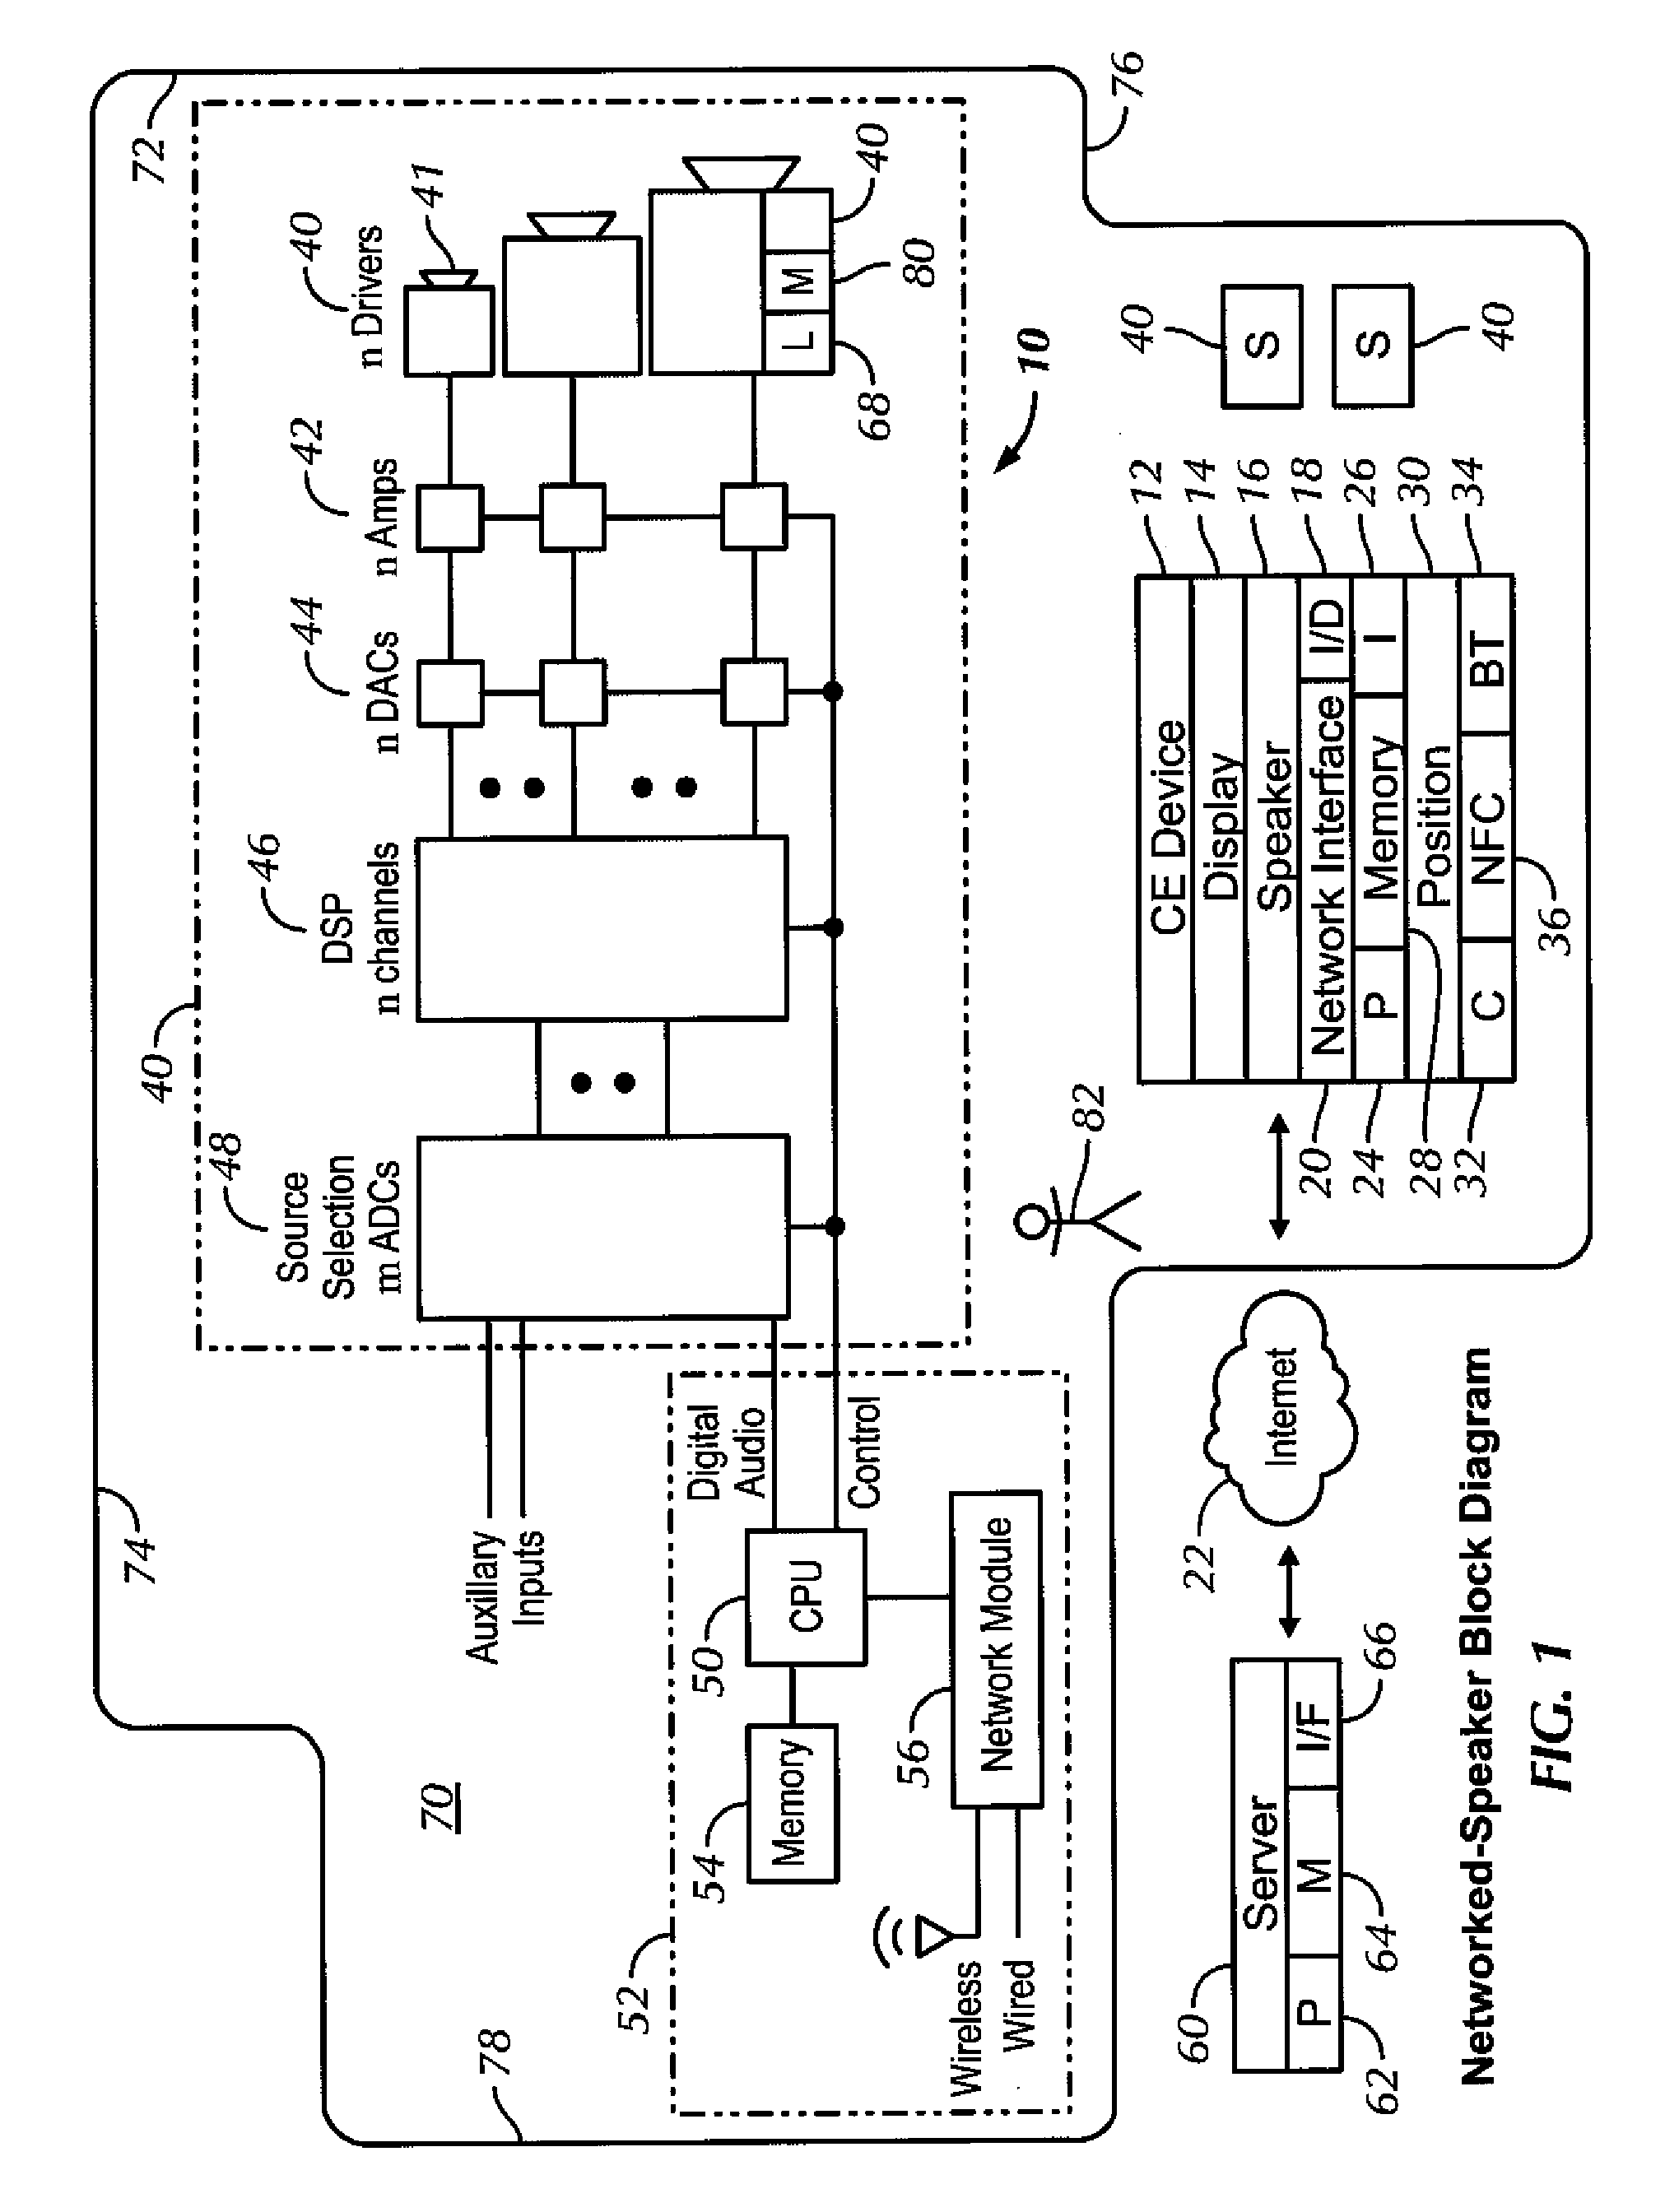 Wireless speaker system with distributed low (bass) frequency